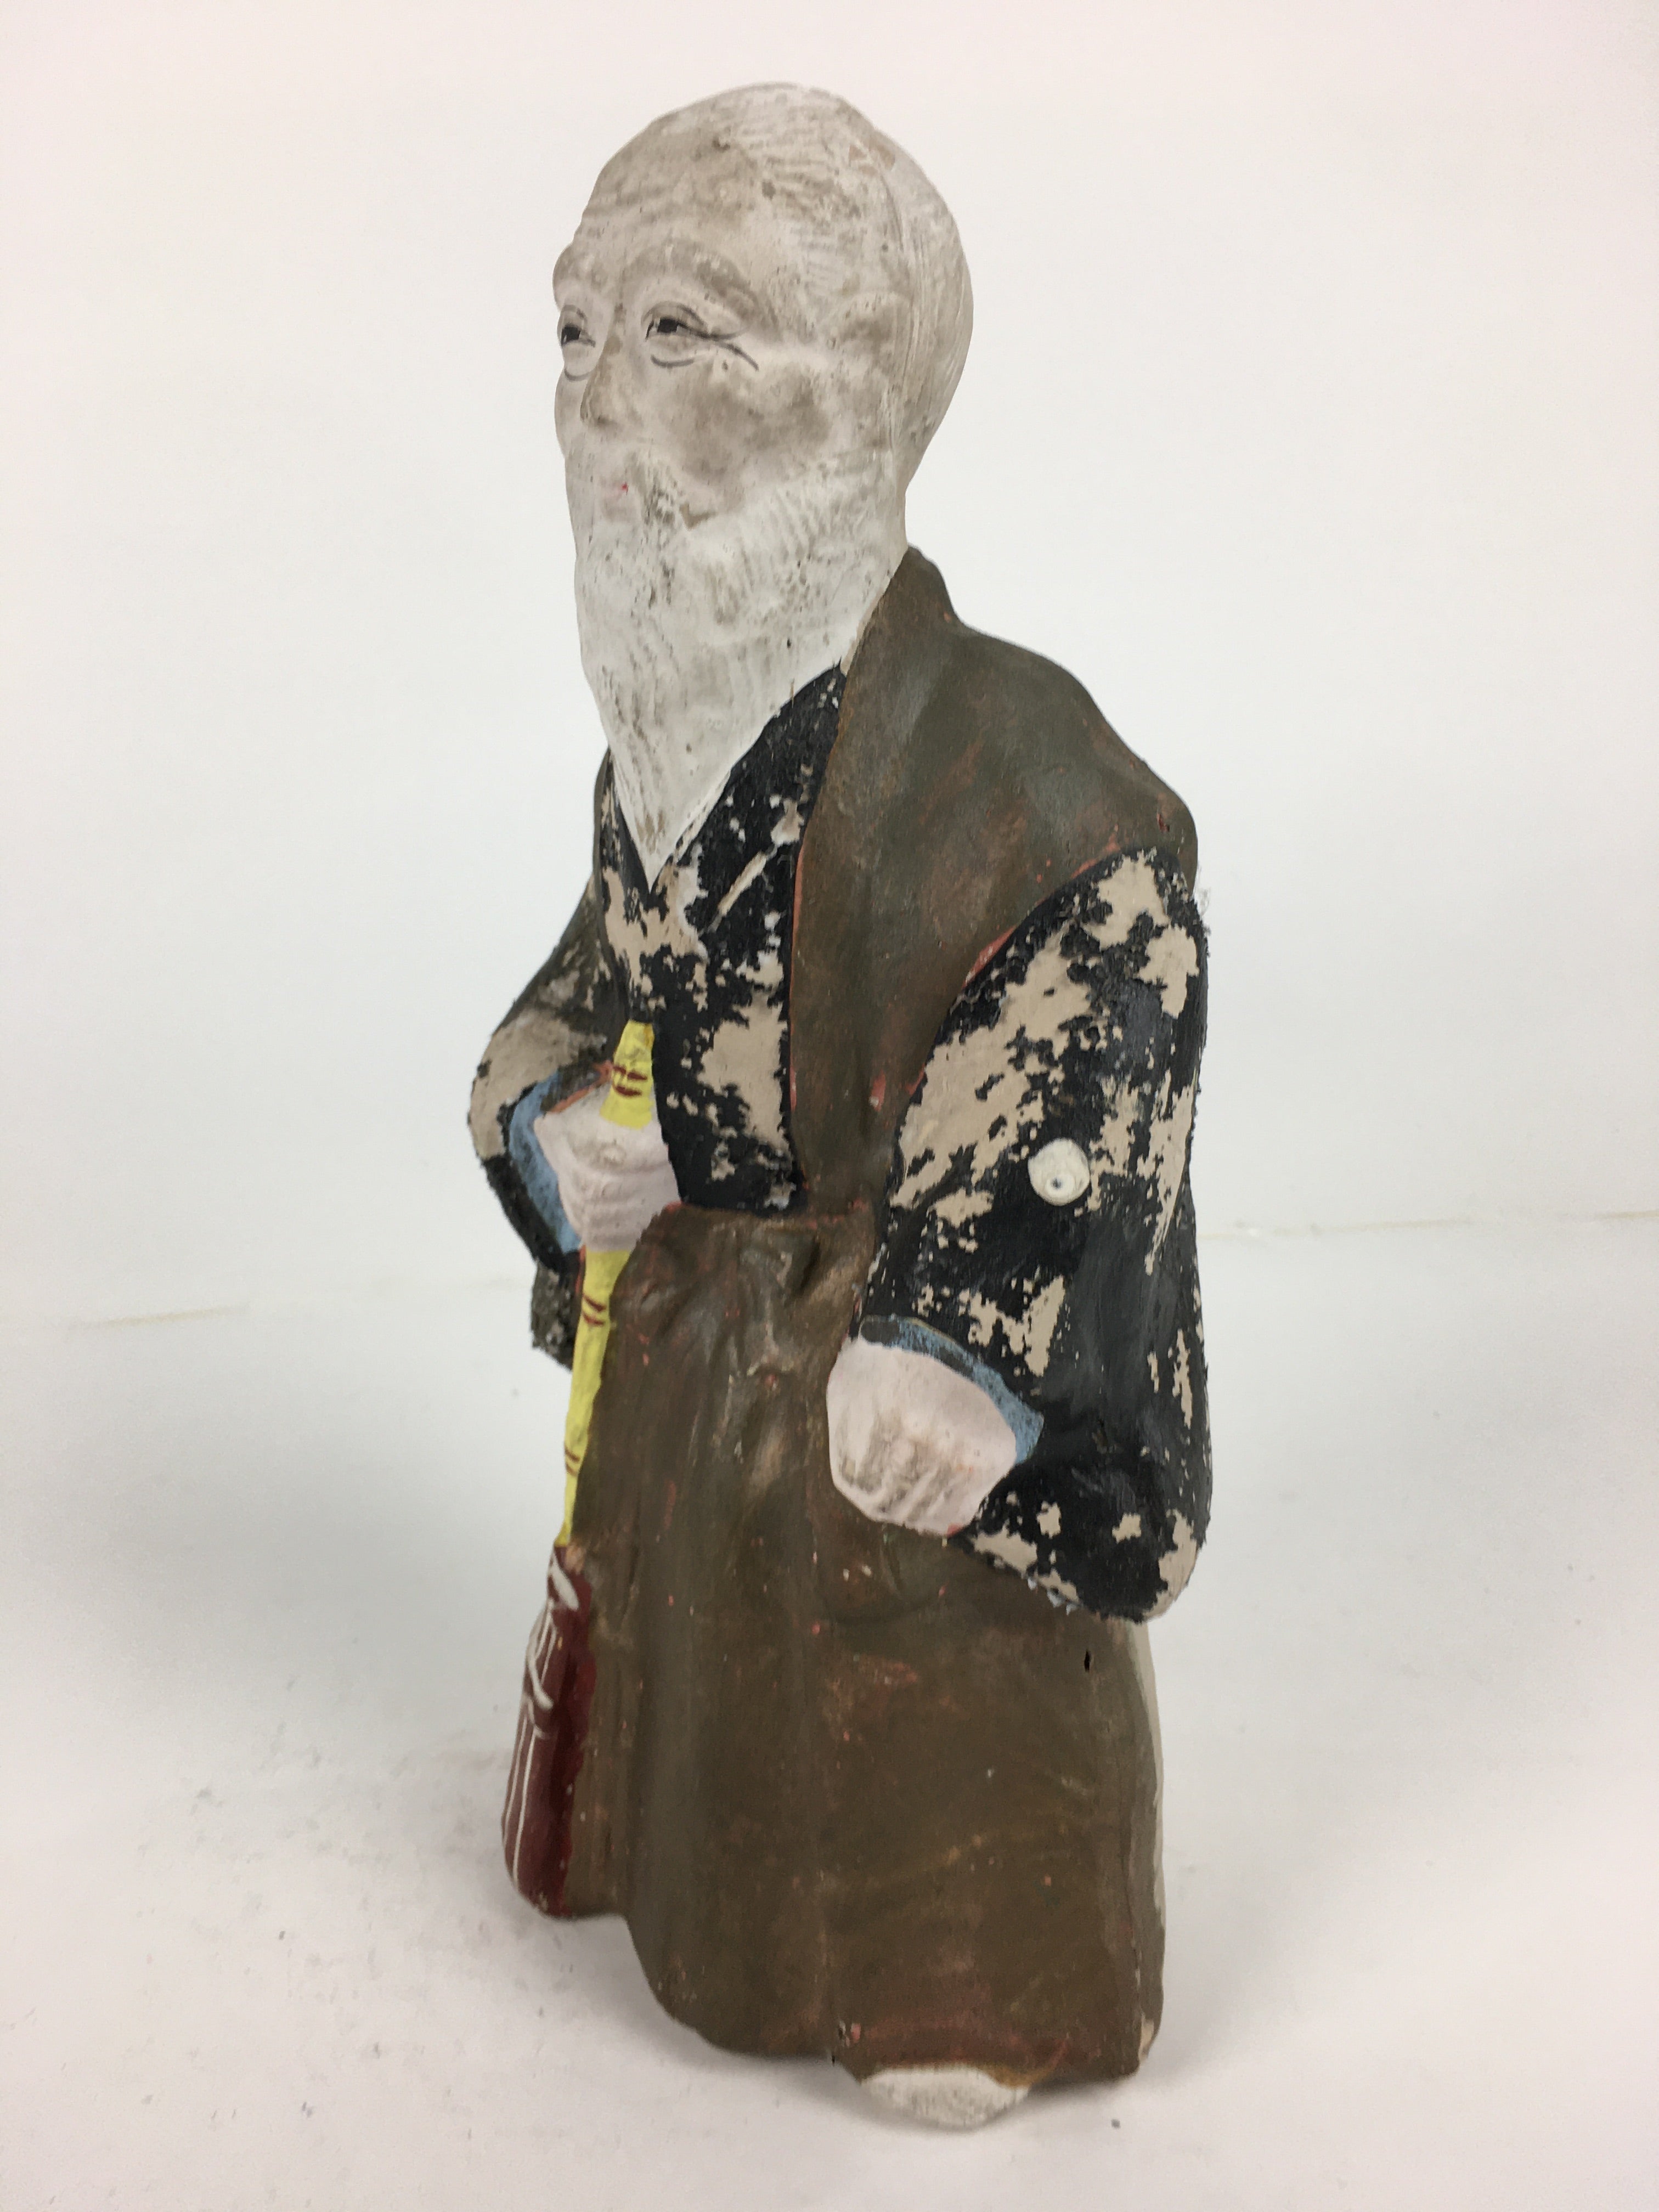 Antique C1922 Japanese Clay Doll Ningyo Traditional Handicraft Old Man BD751